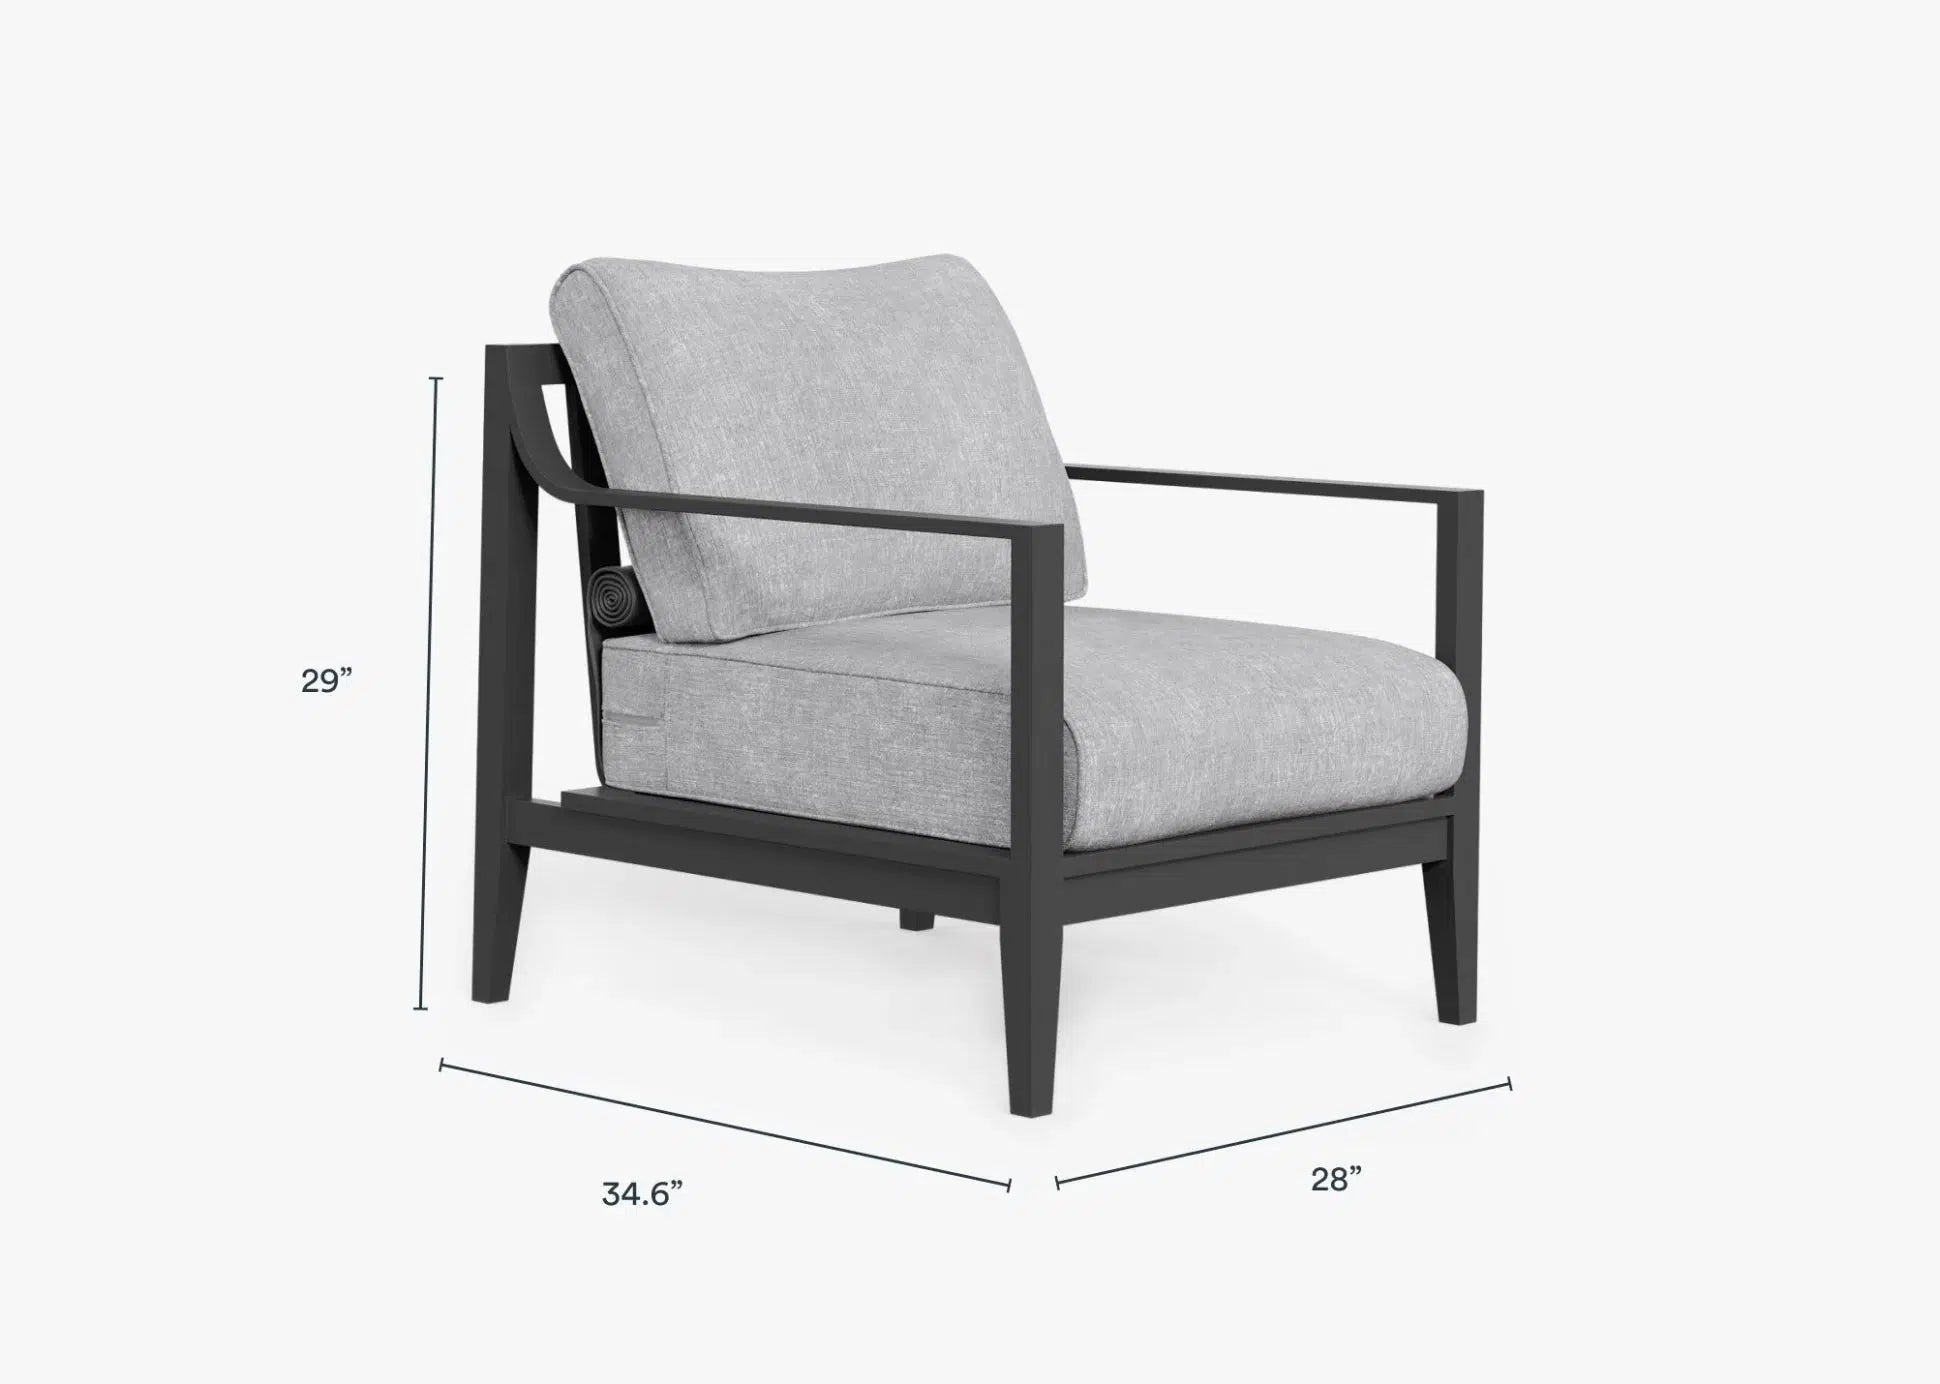 Live Outer 27" Charcoal Aluminum Outdoor Armchair With Pacific Fog Gray Cushion